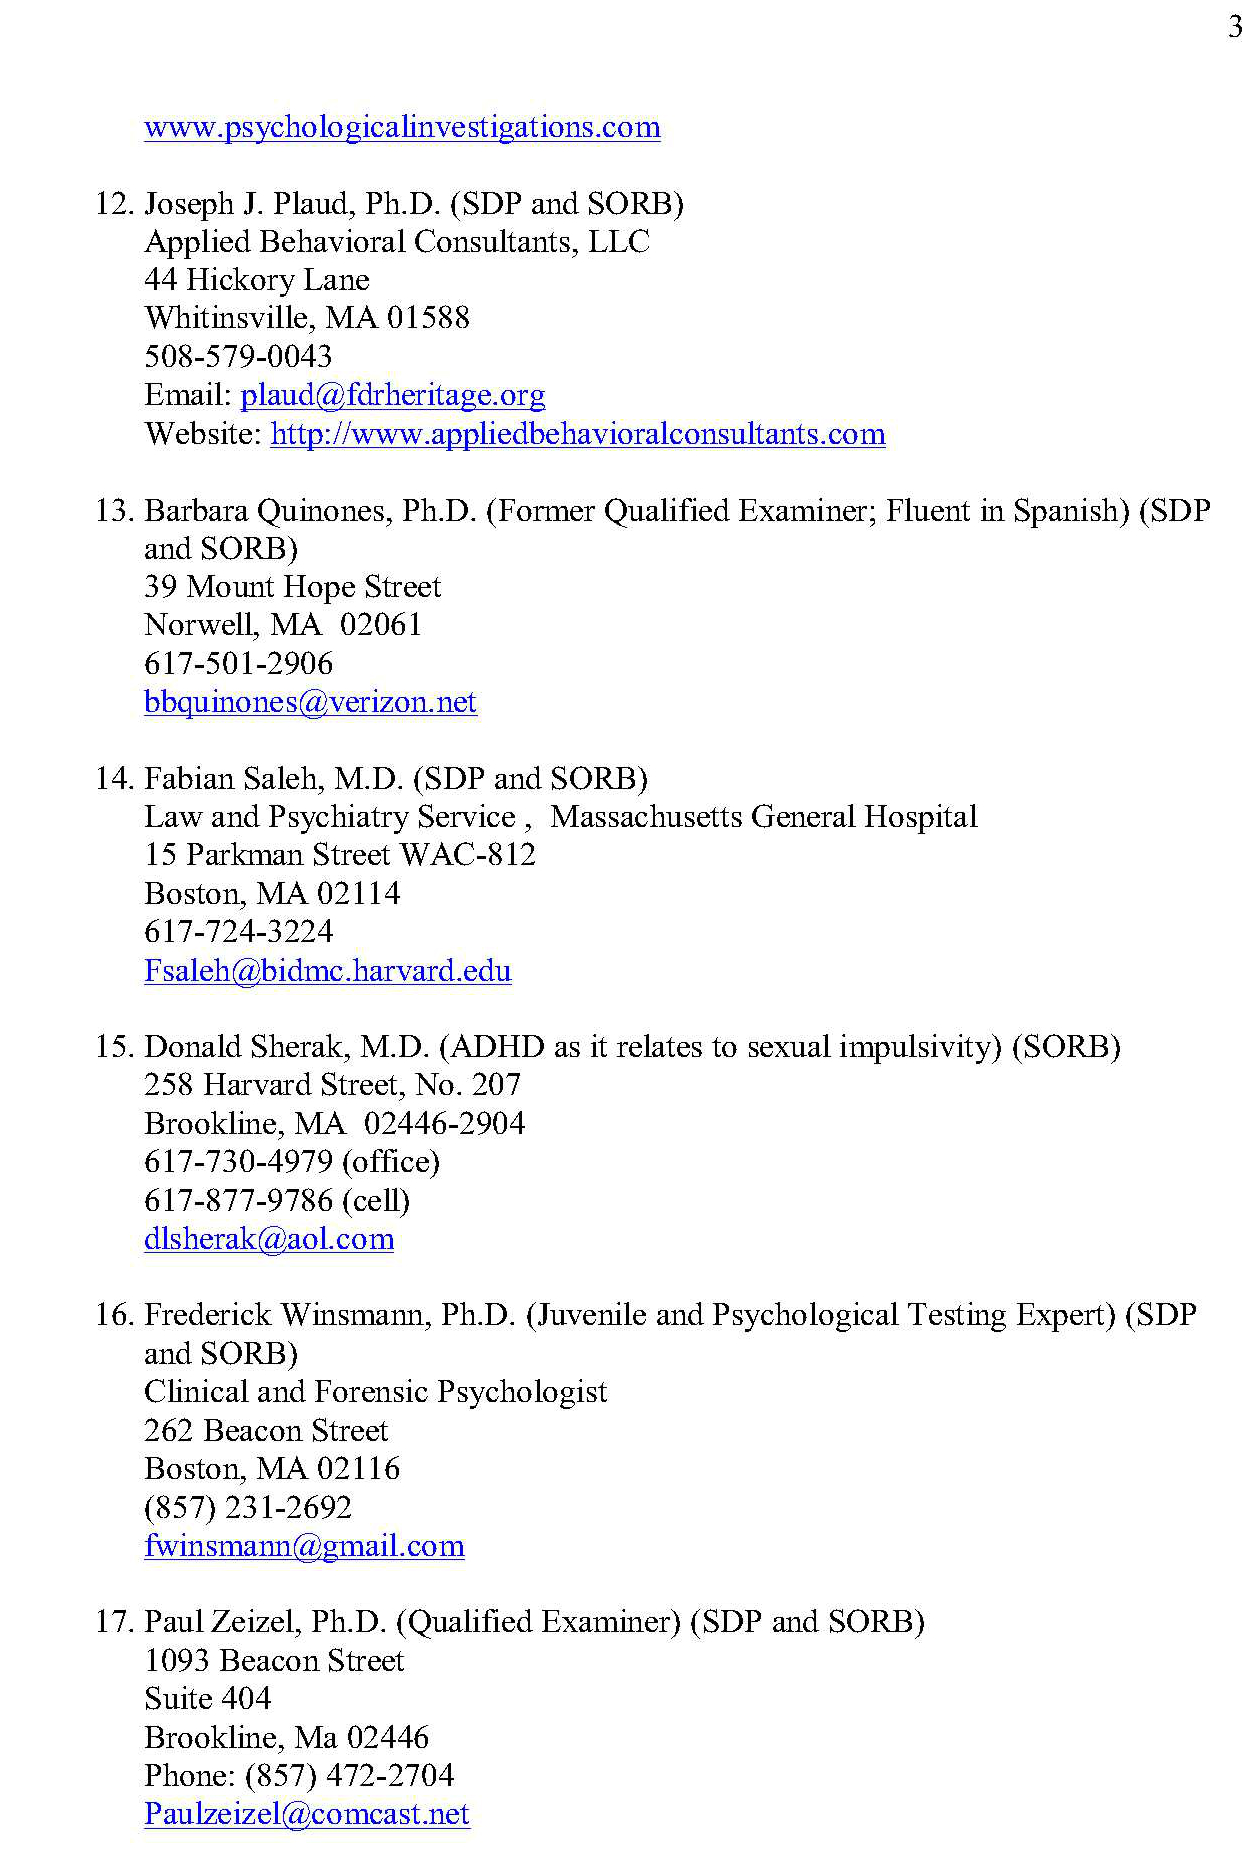 List of Sex Offender Risk Evaluation Experts.Updated Oct. 2014_3